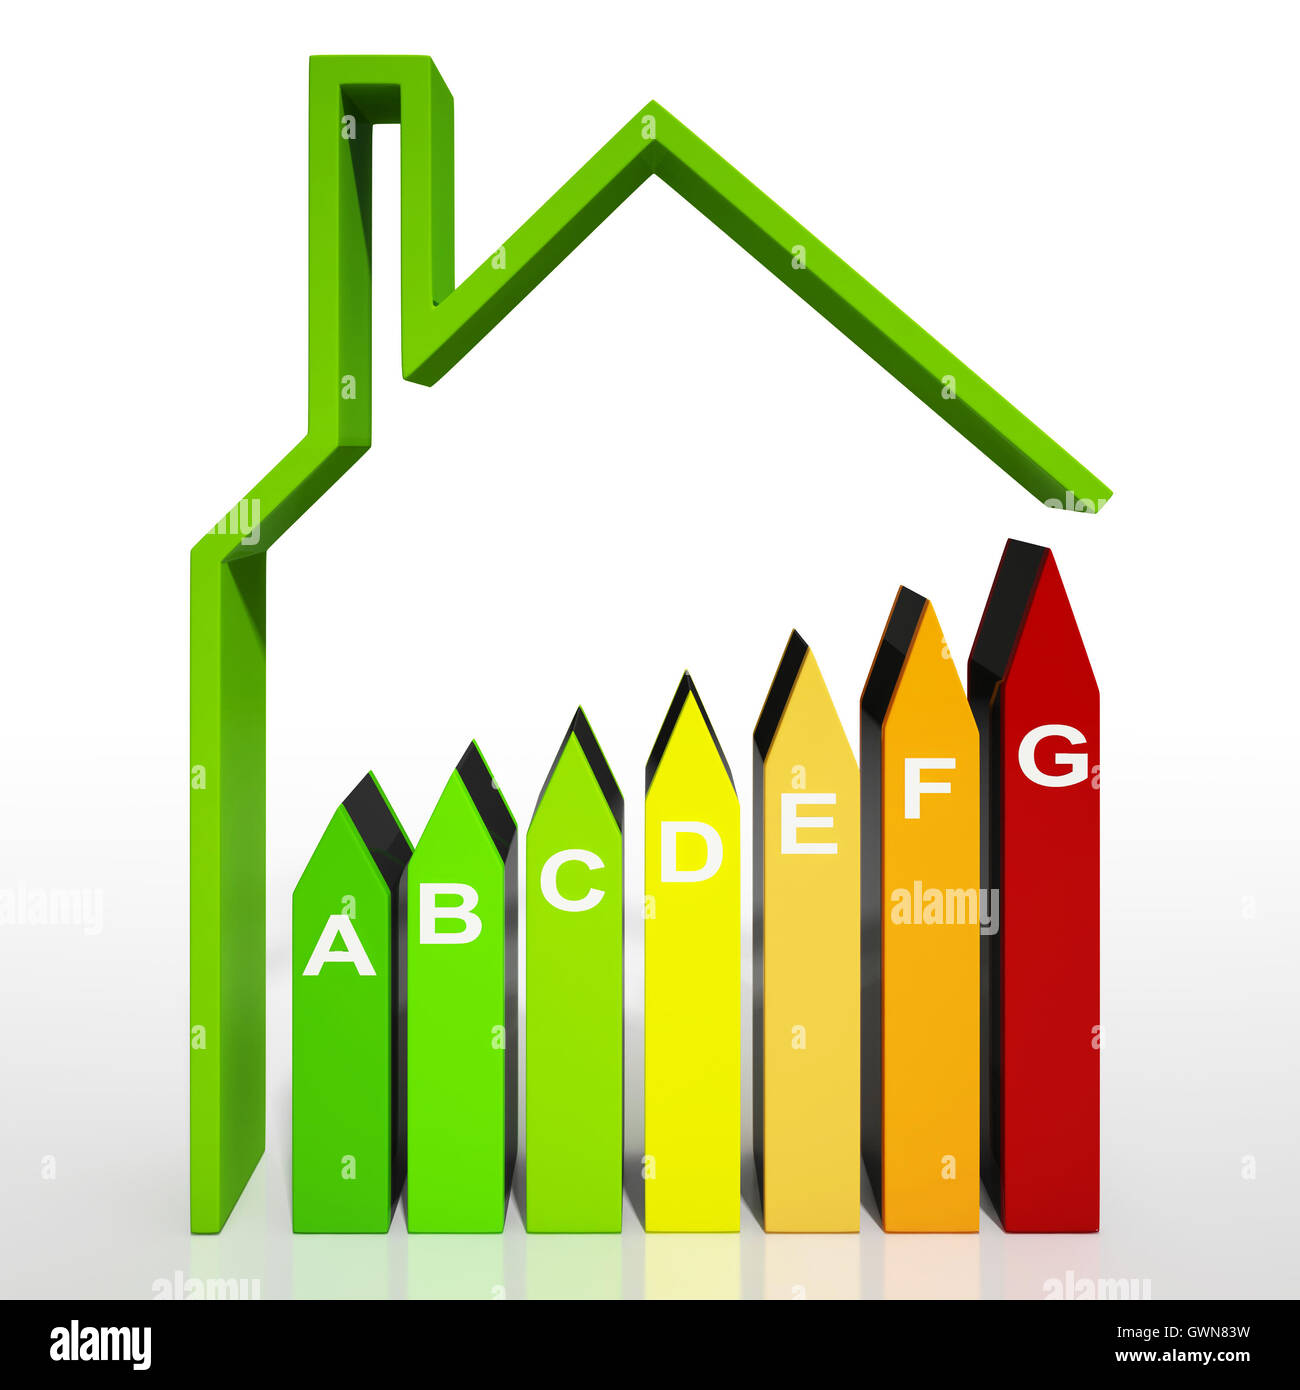 Energy Efficiency Rating Diagram Shows Green House Stock Photo